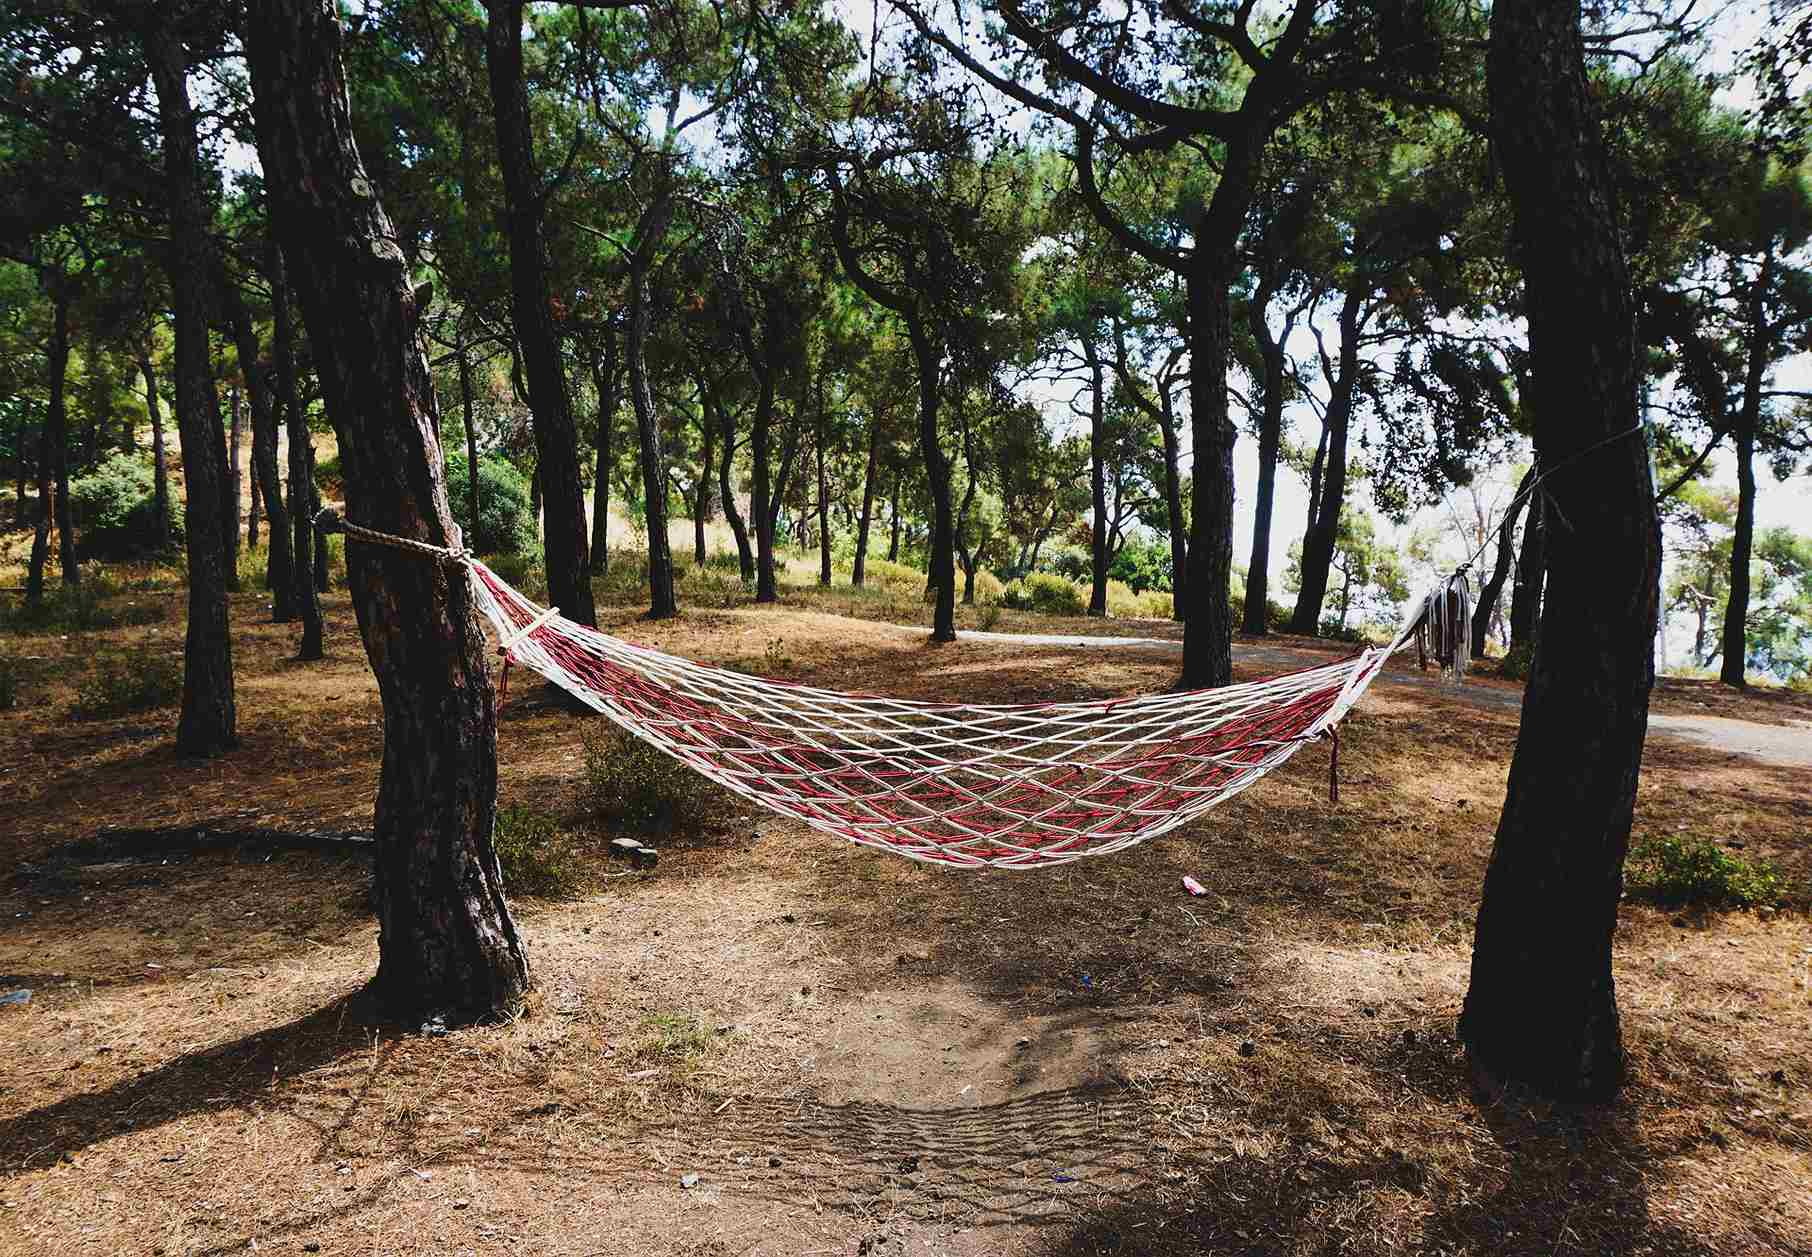 Bivouac in a hammock is in a legal gray area